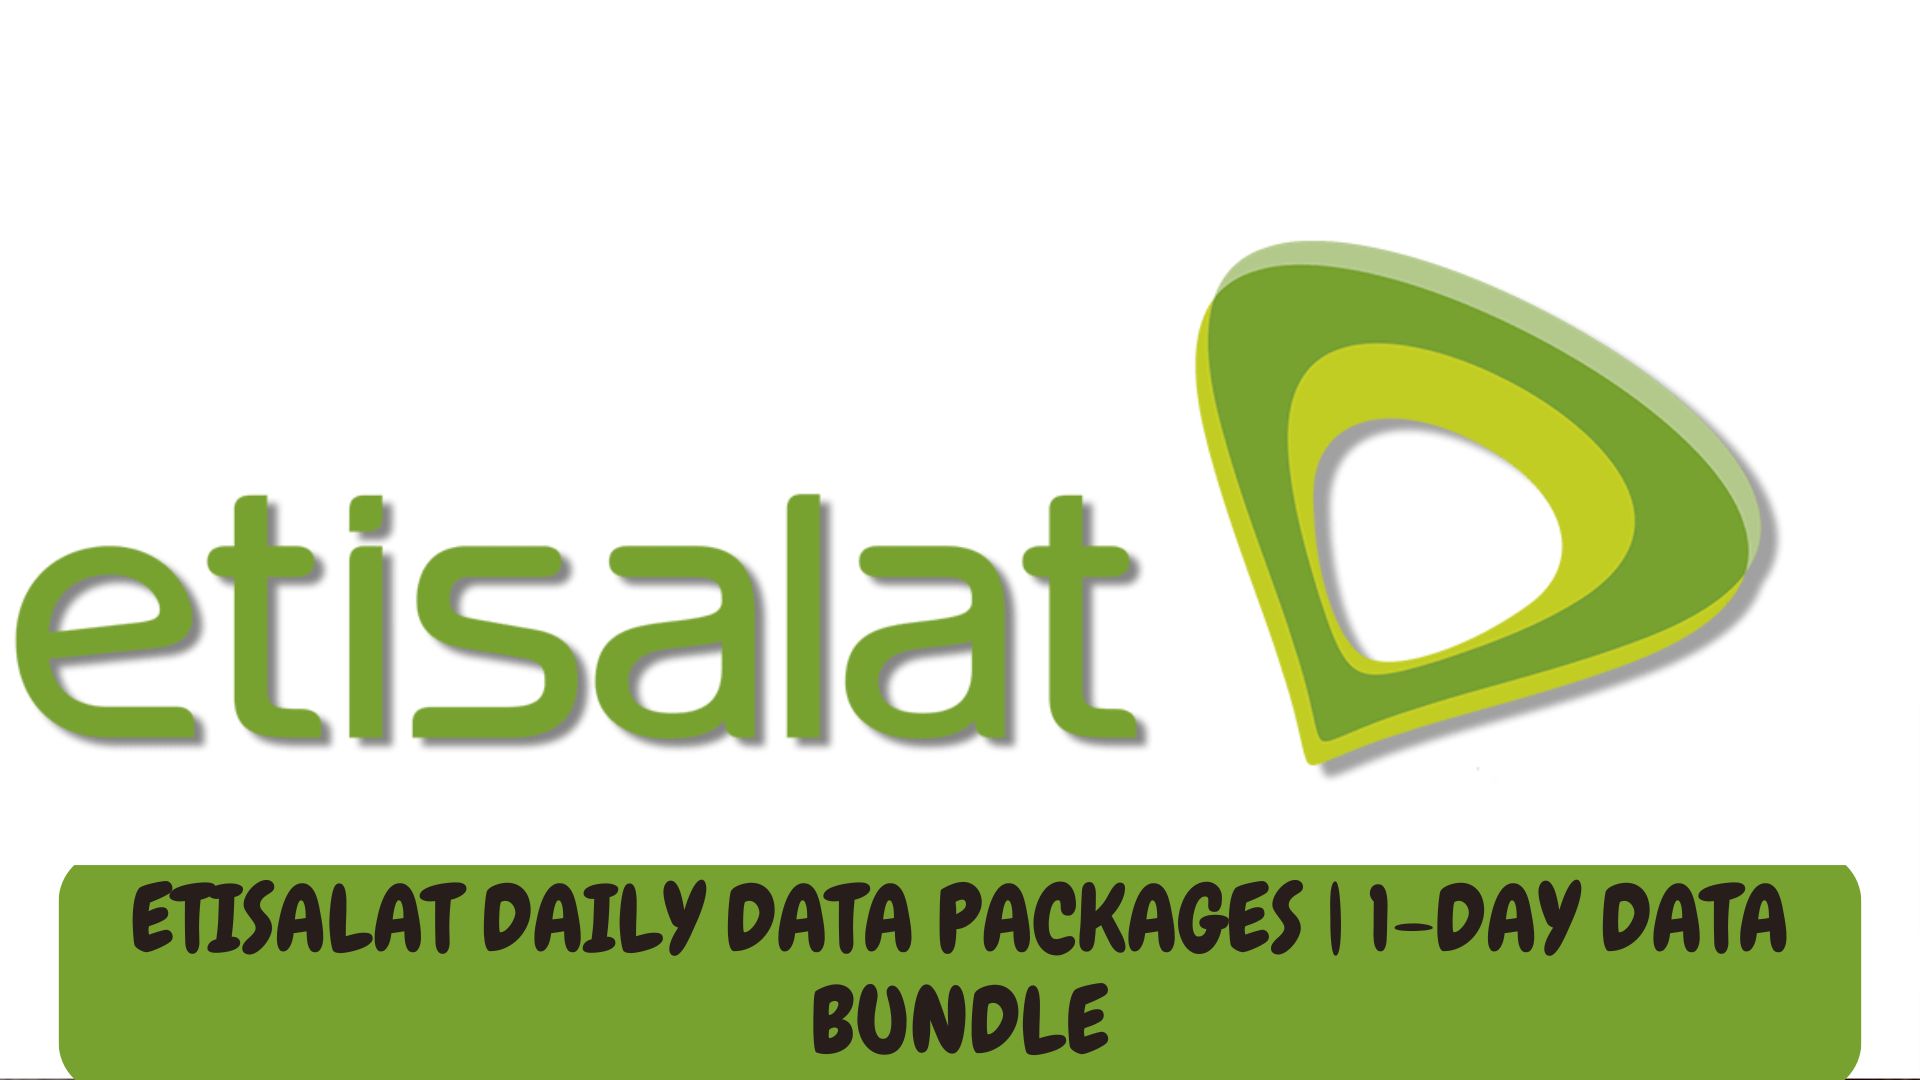 Etisalat daily data packages